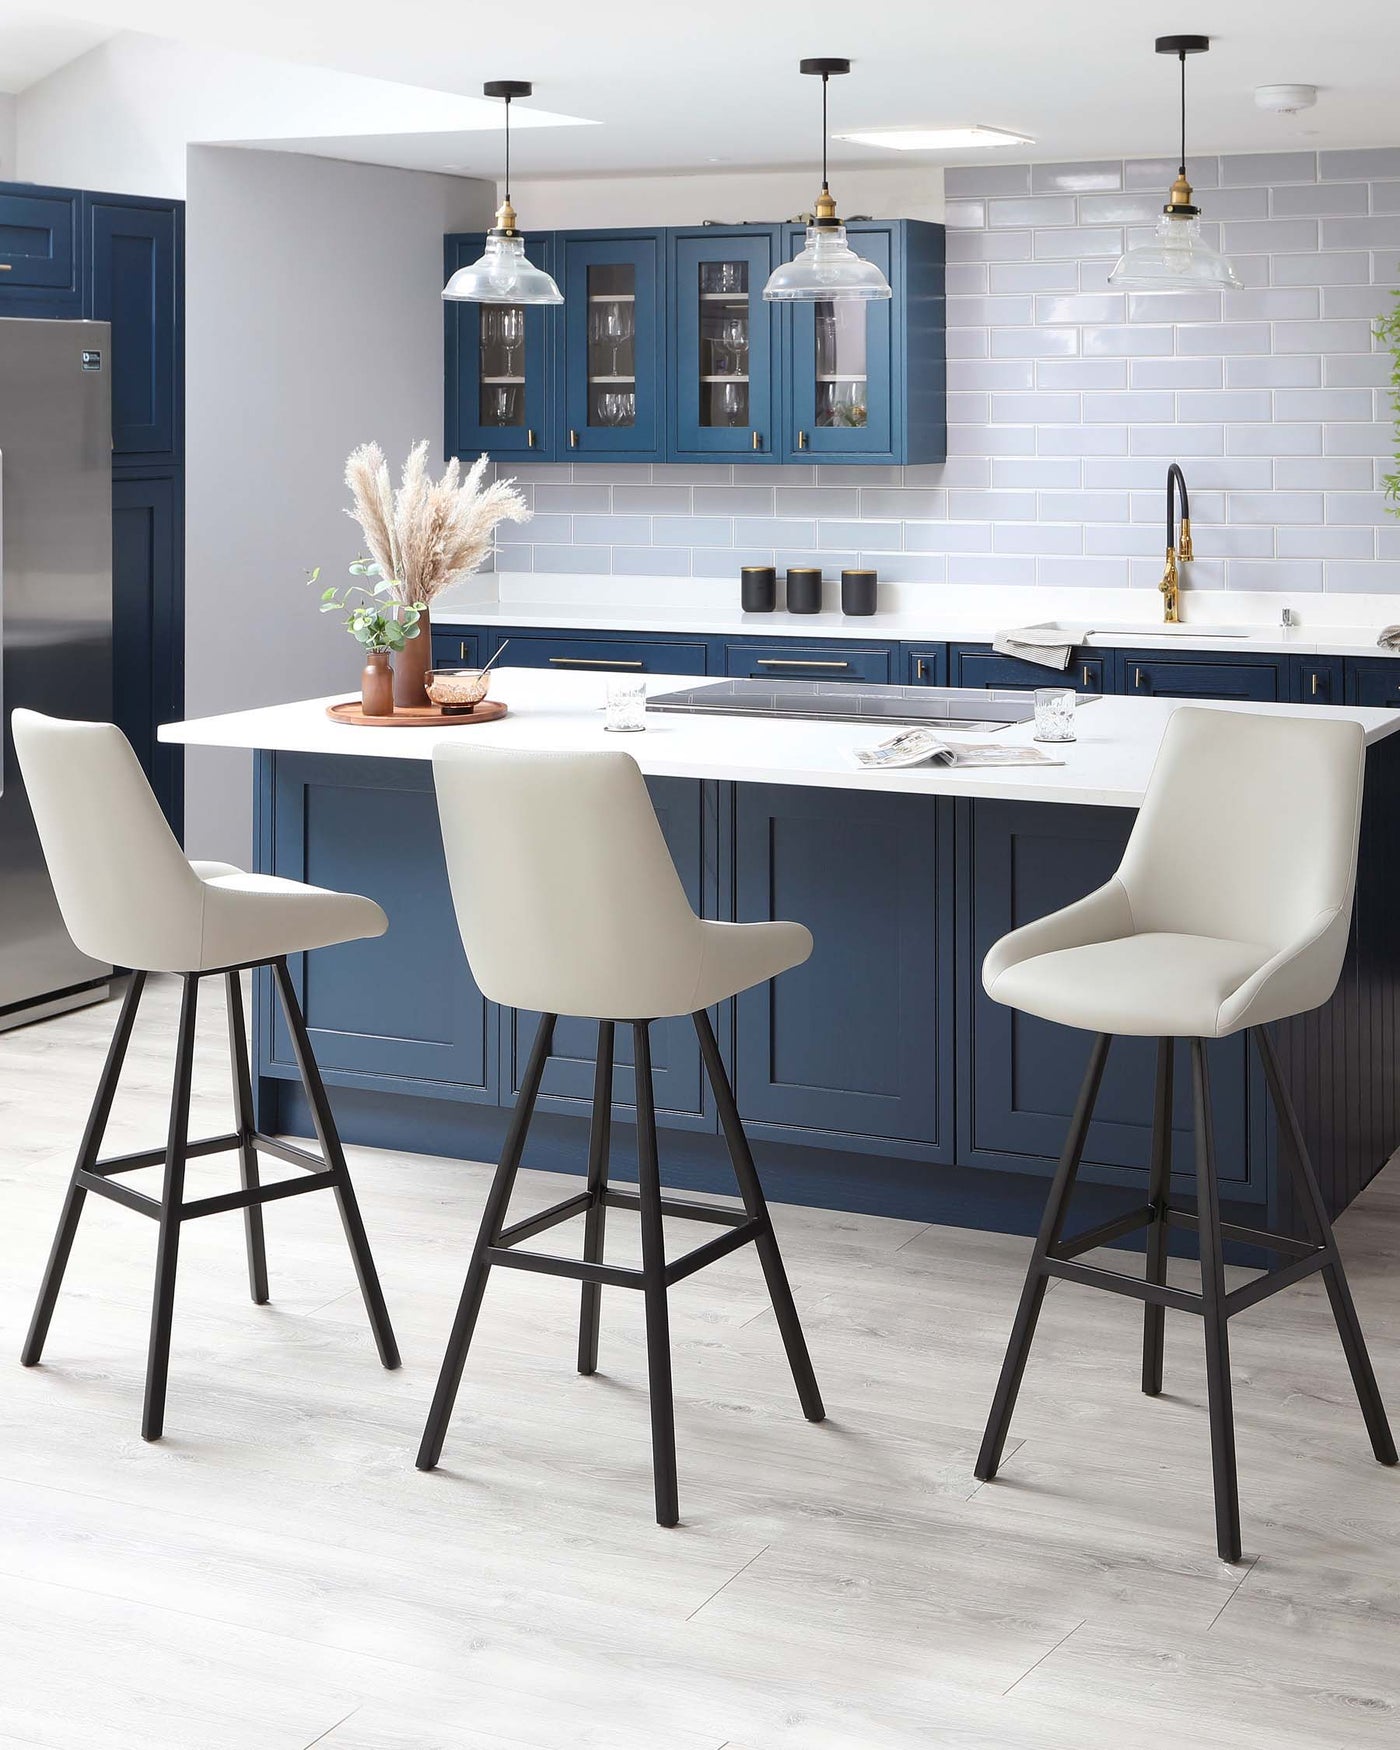 Three modern bar stools with beige upholstered seats and black, angled metal legs positioned at a white kitchen island.